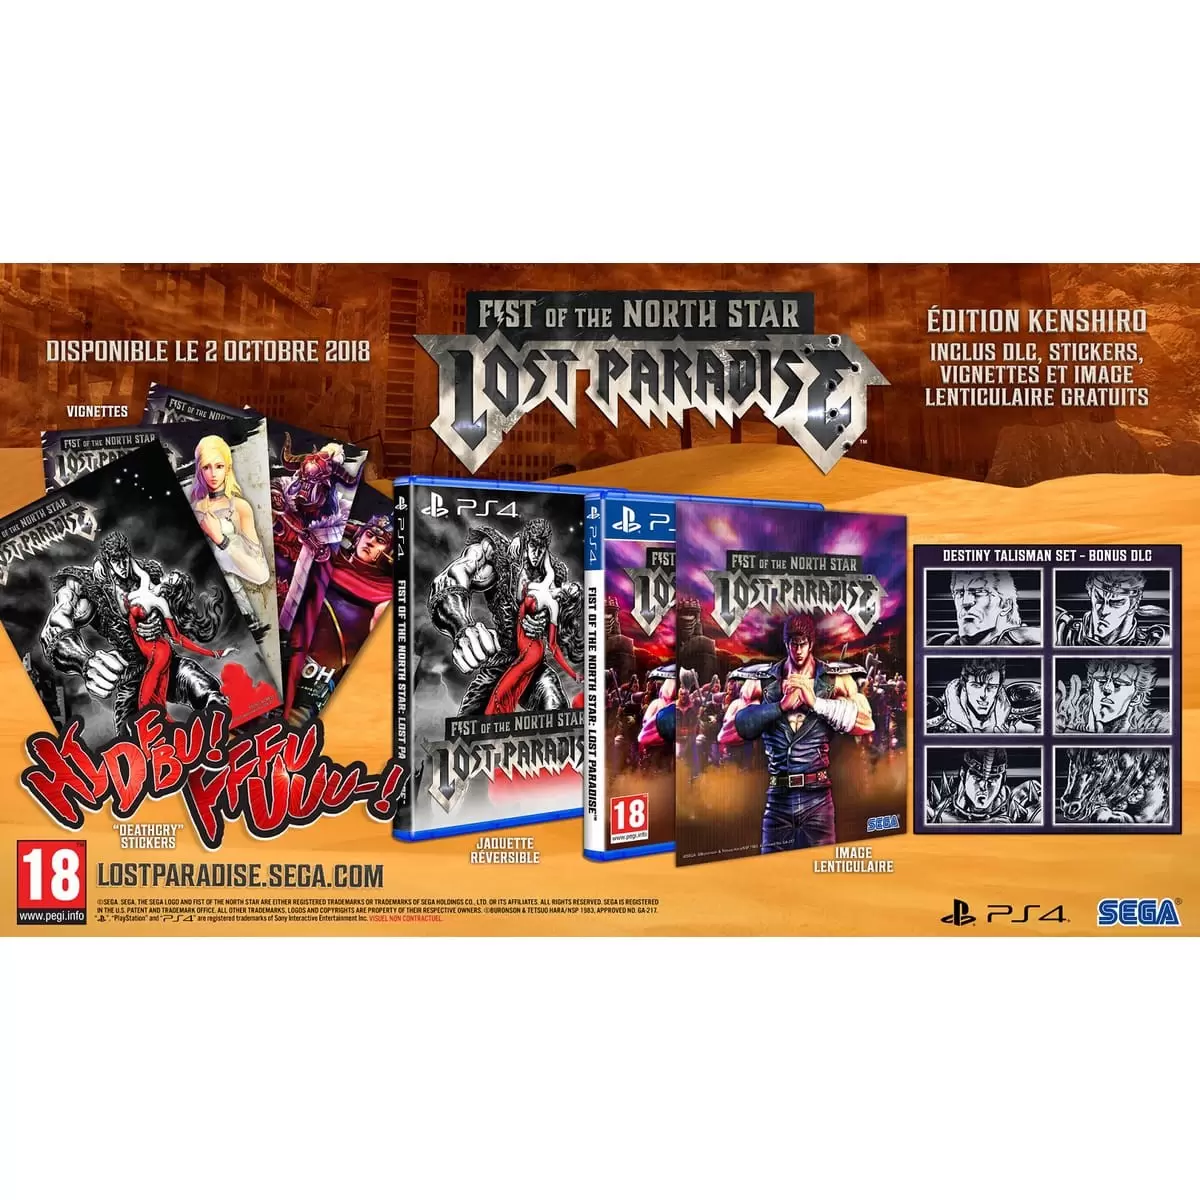 PS4 Games - Fist of the North Star : Lost Paradise - Kenshiro Edition